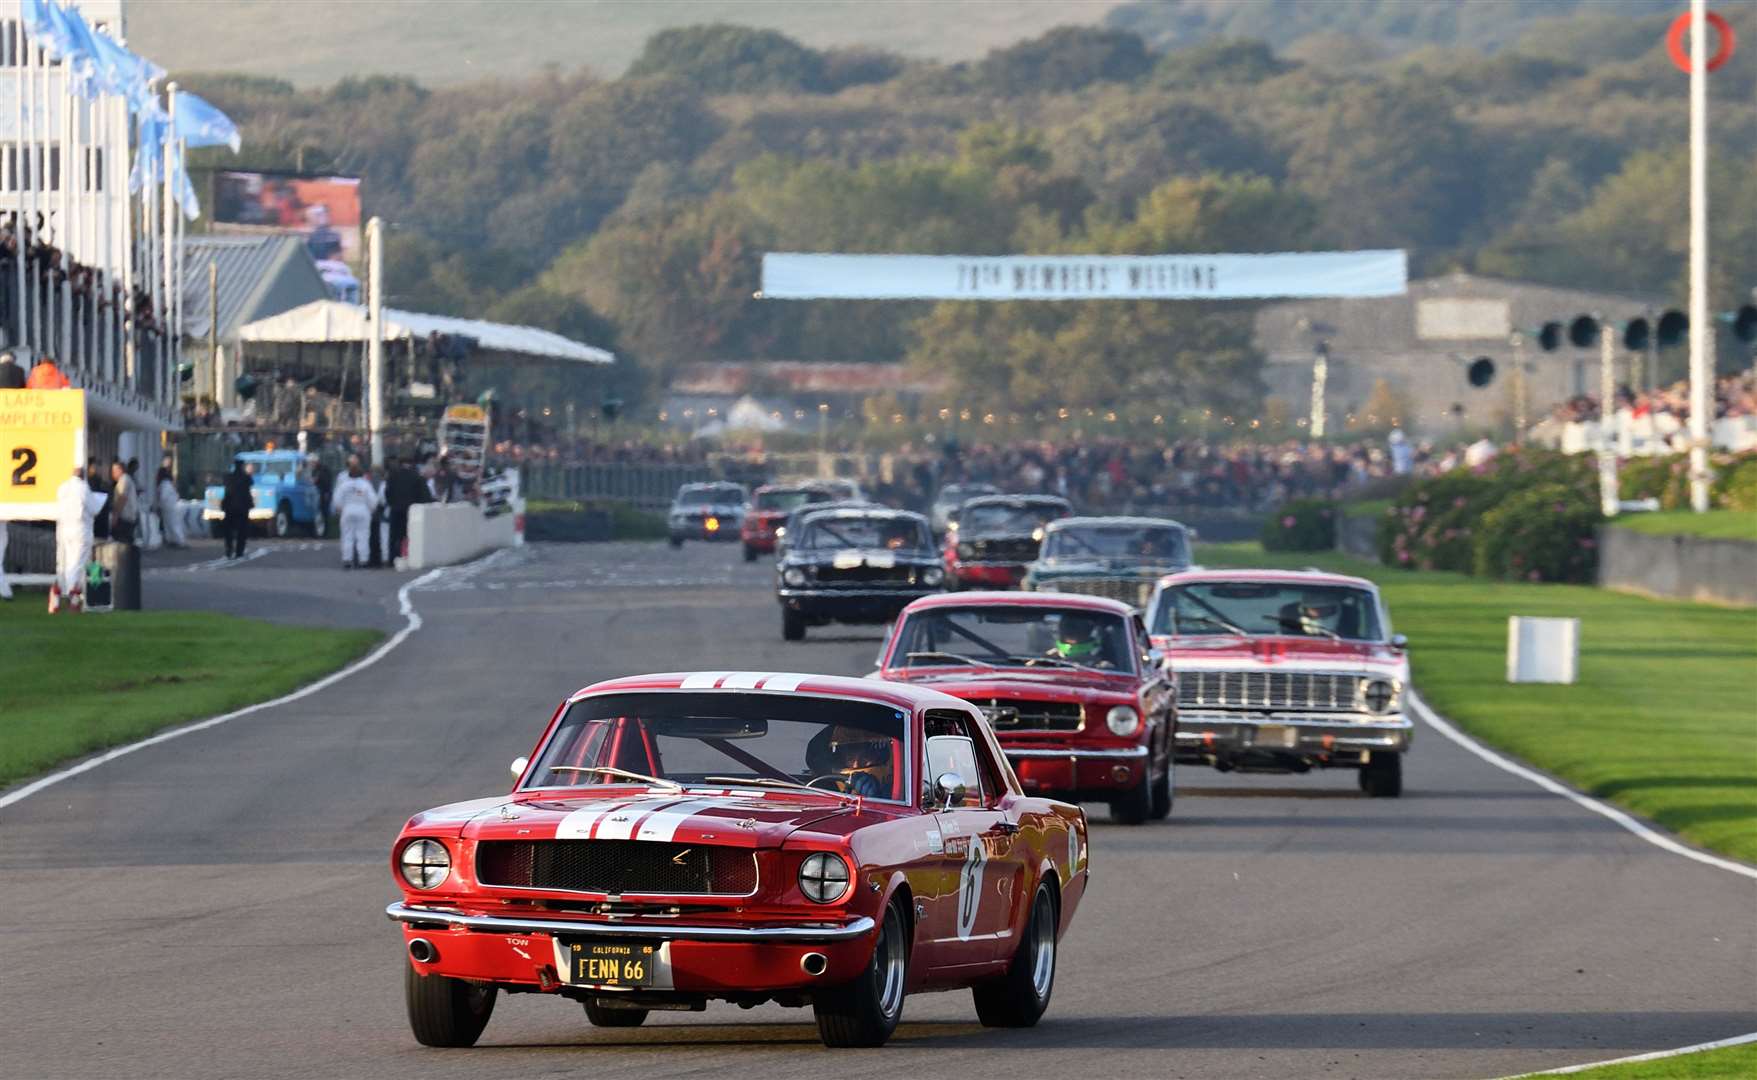 Rob Fenn, from West Kingsdown, retired ater five laps, in his 1965 Ford Mustang, in the Pierpoint Cup race. Picture: Simon Hildrew (52524996)